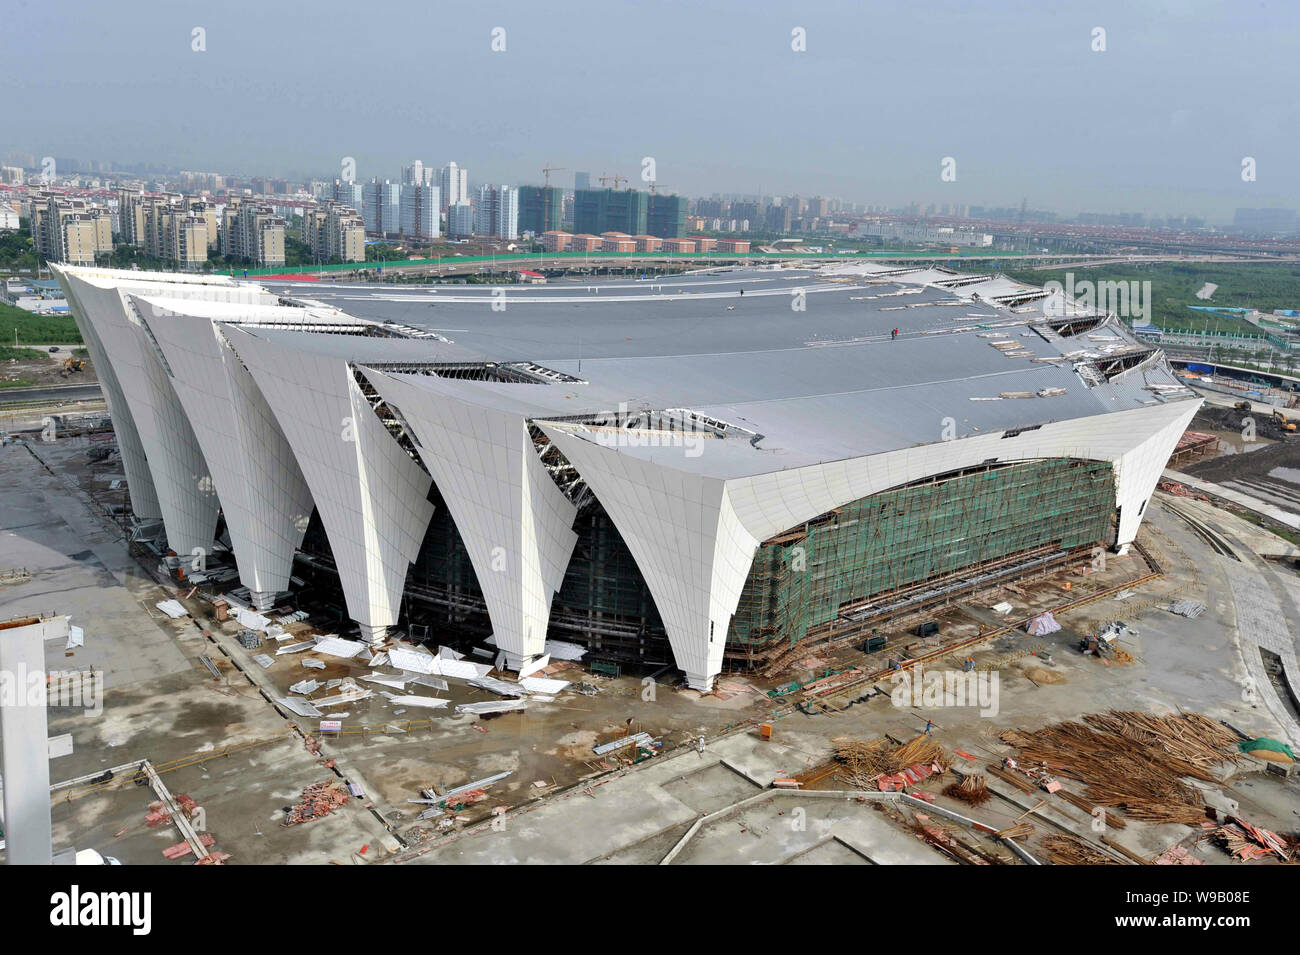 View of the Shanghai Oriental Sport Center under construction for the 14th FINA World Championships in Shanghai, China, 13 September 2010.   The 14th Stock Photo